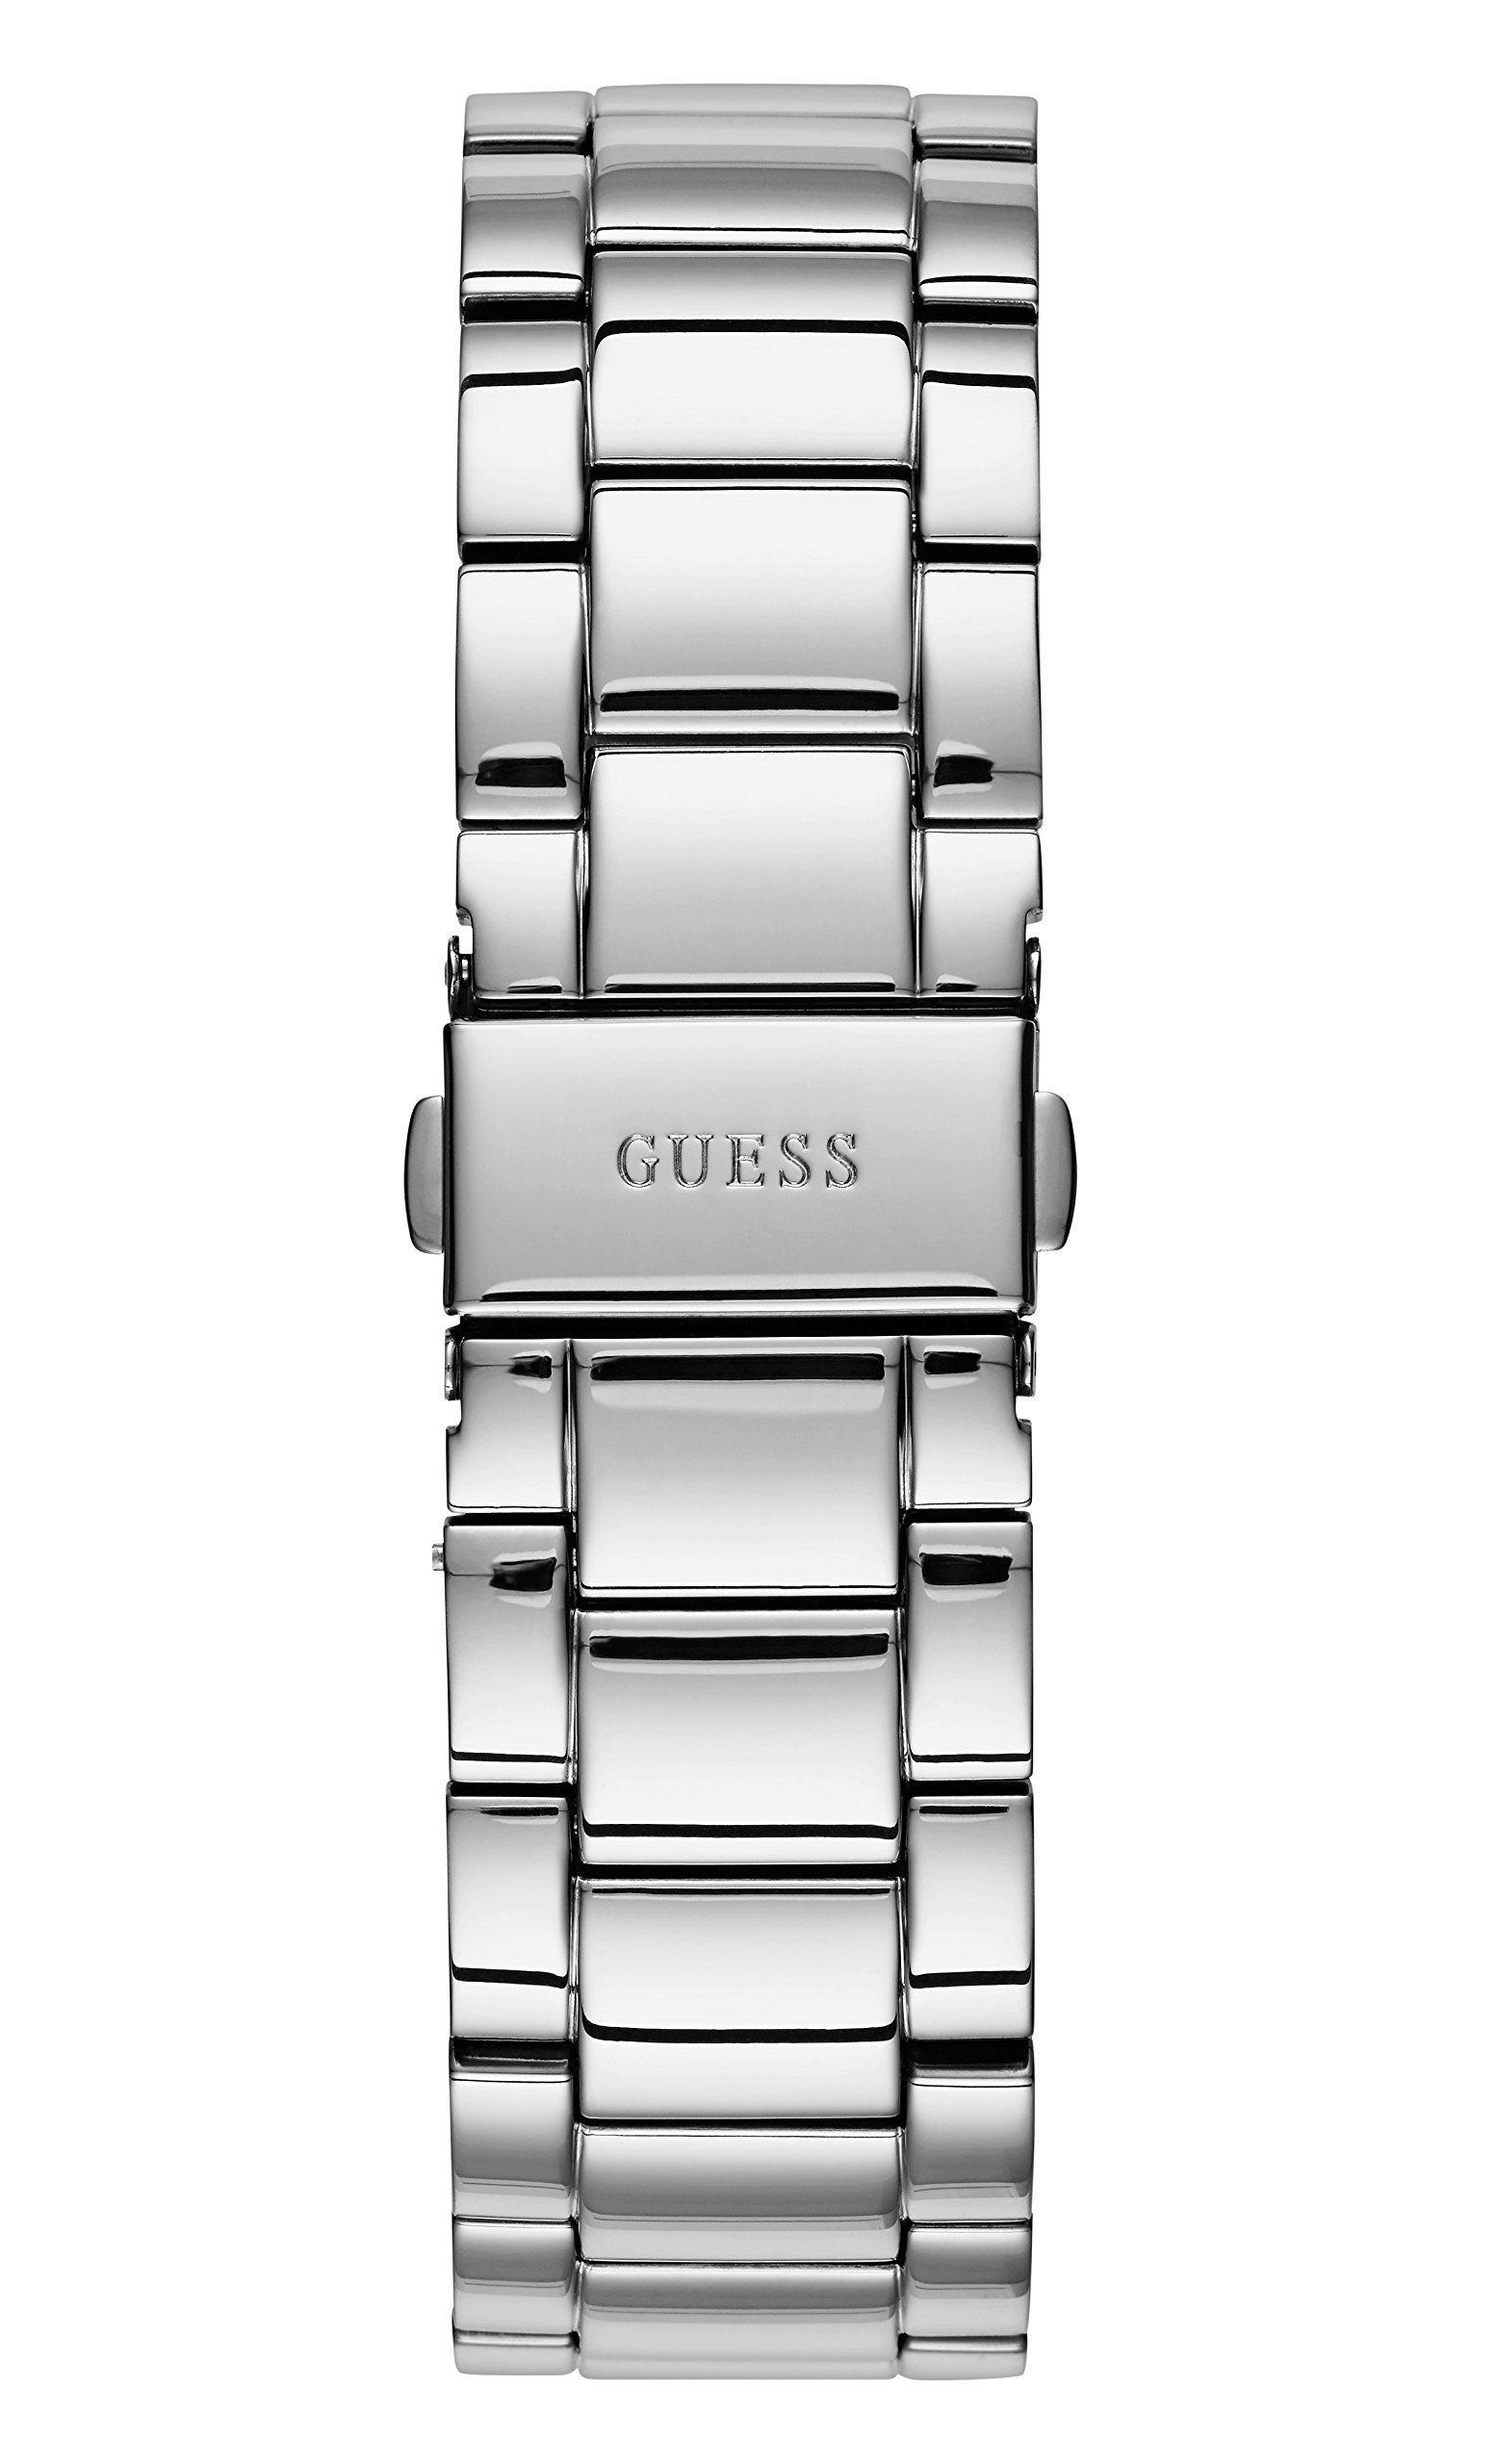 GUESS Womens Constellation Analog Watch